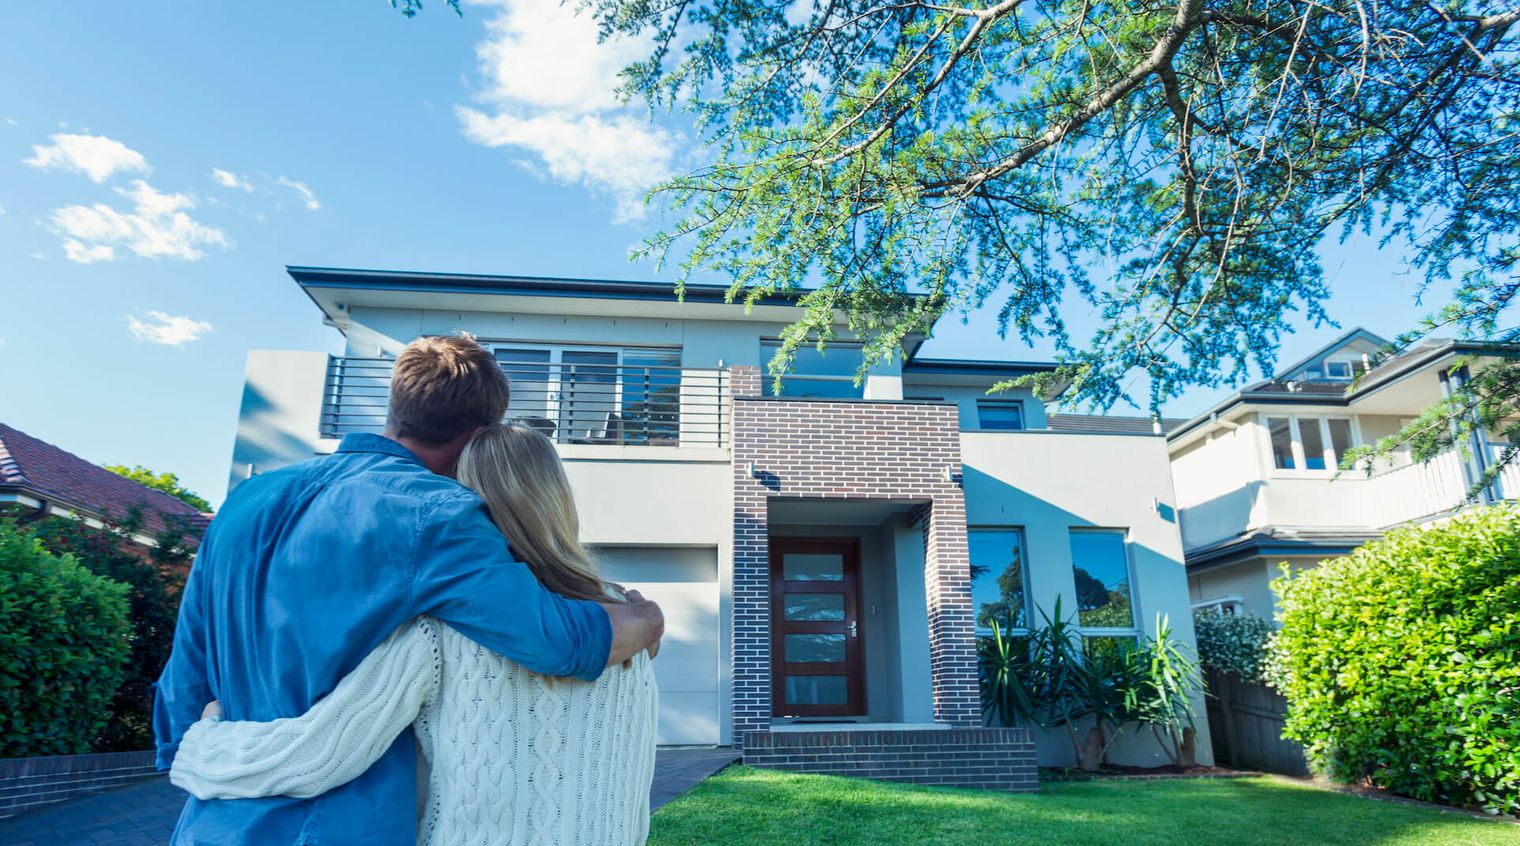 Need a little extra so you can buy your dream property? Here are 4 tips that can help maximise your borrowing power.